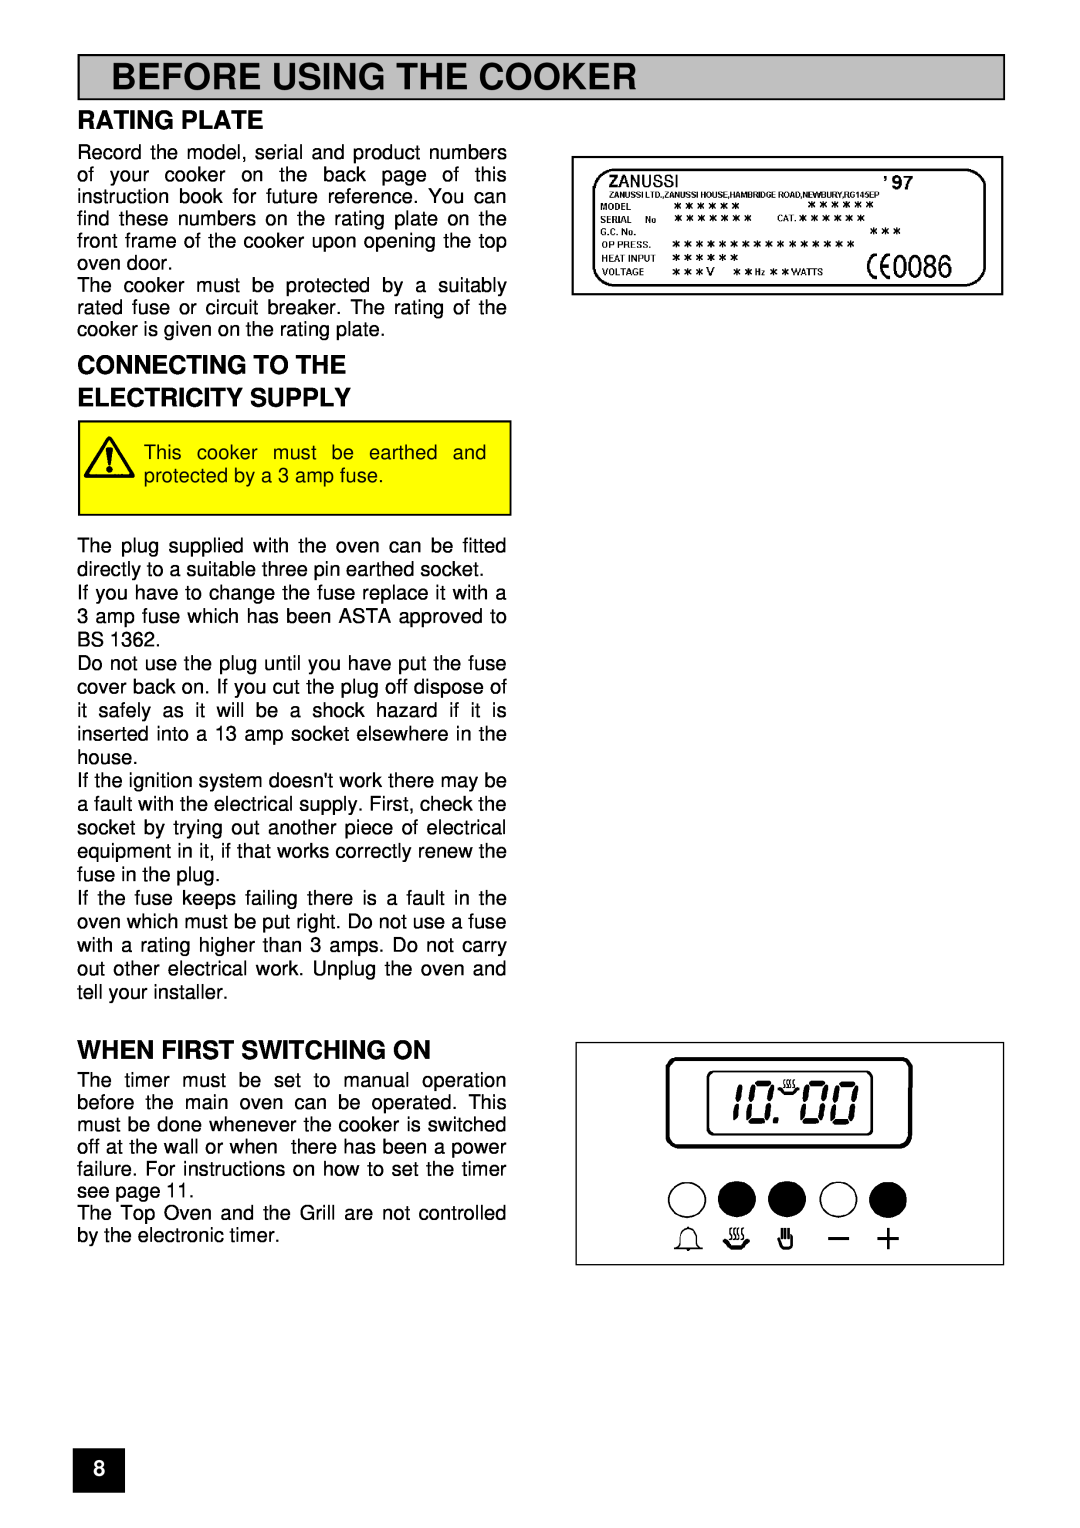 Zanussi ZUG 78 manual Before Using The Cooker, Rating Plate, Connecting To The Electricity Supply, When First Switching On 